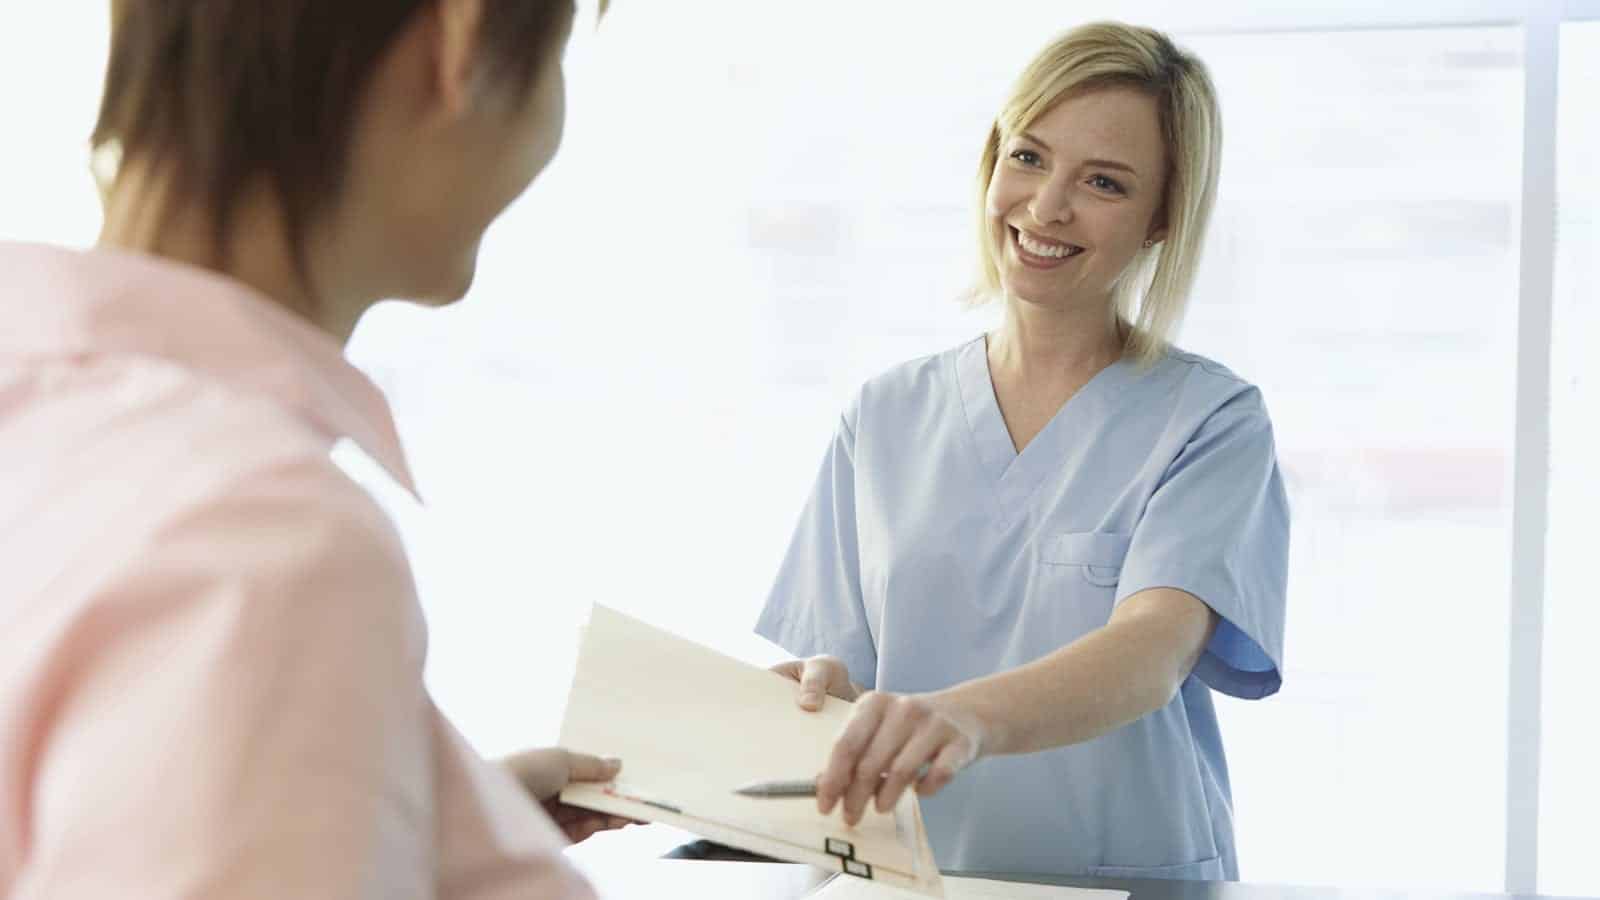 Female Nurse Speaking With Female Patient In Doctor's Office